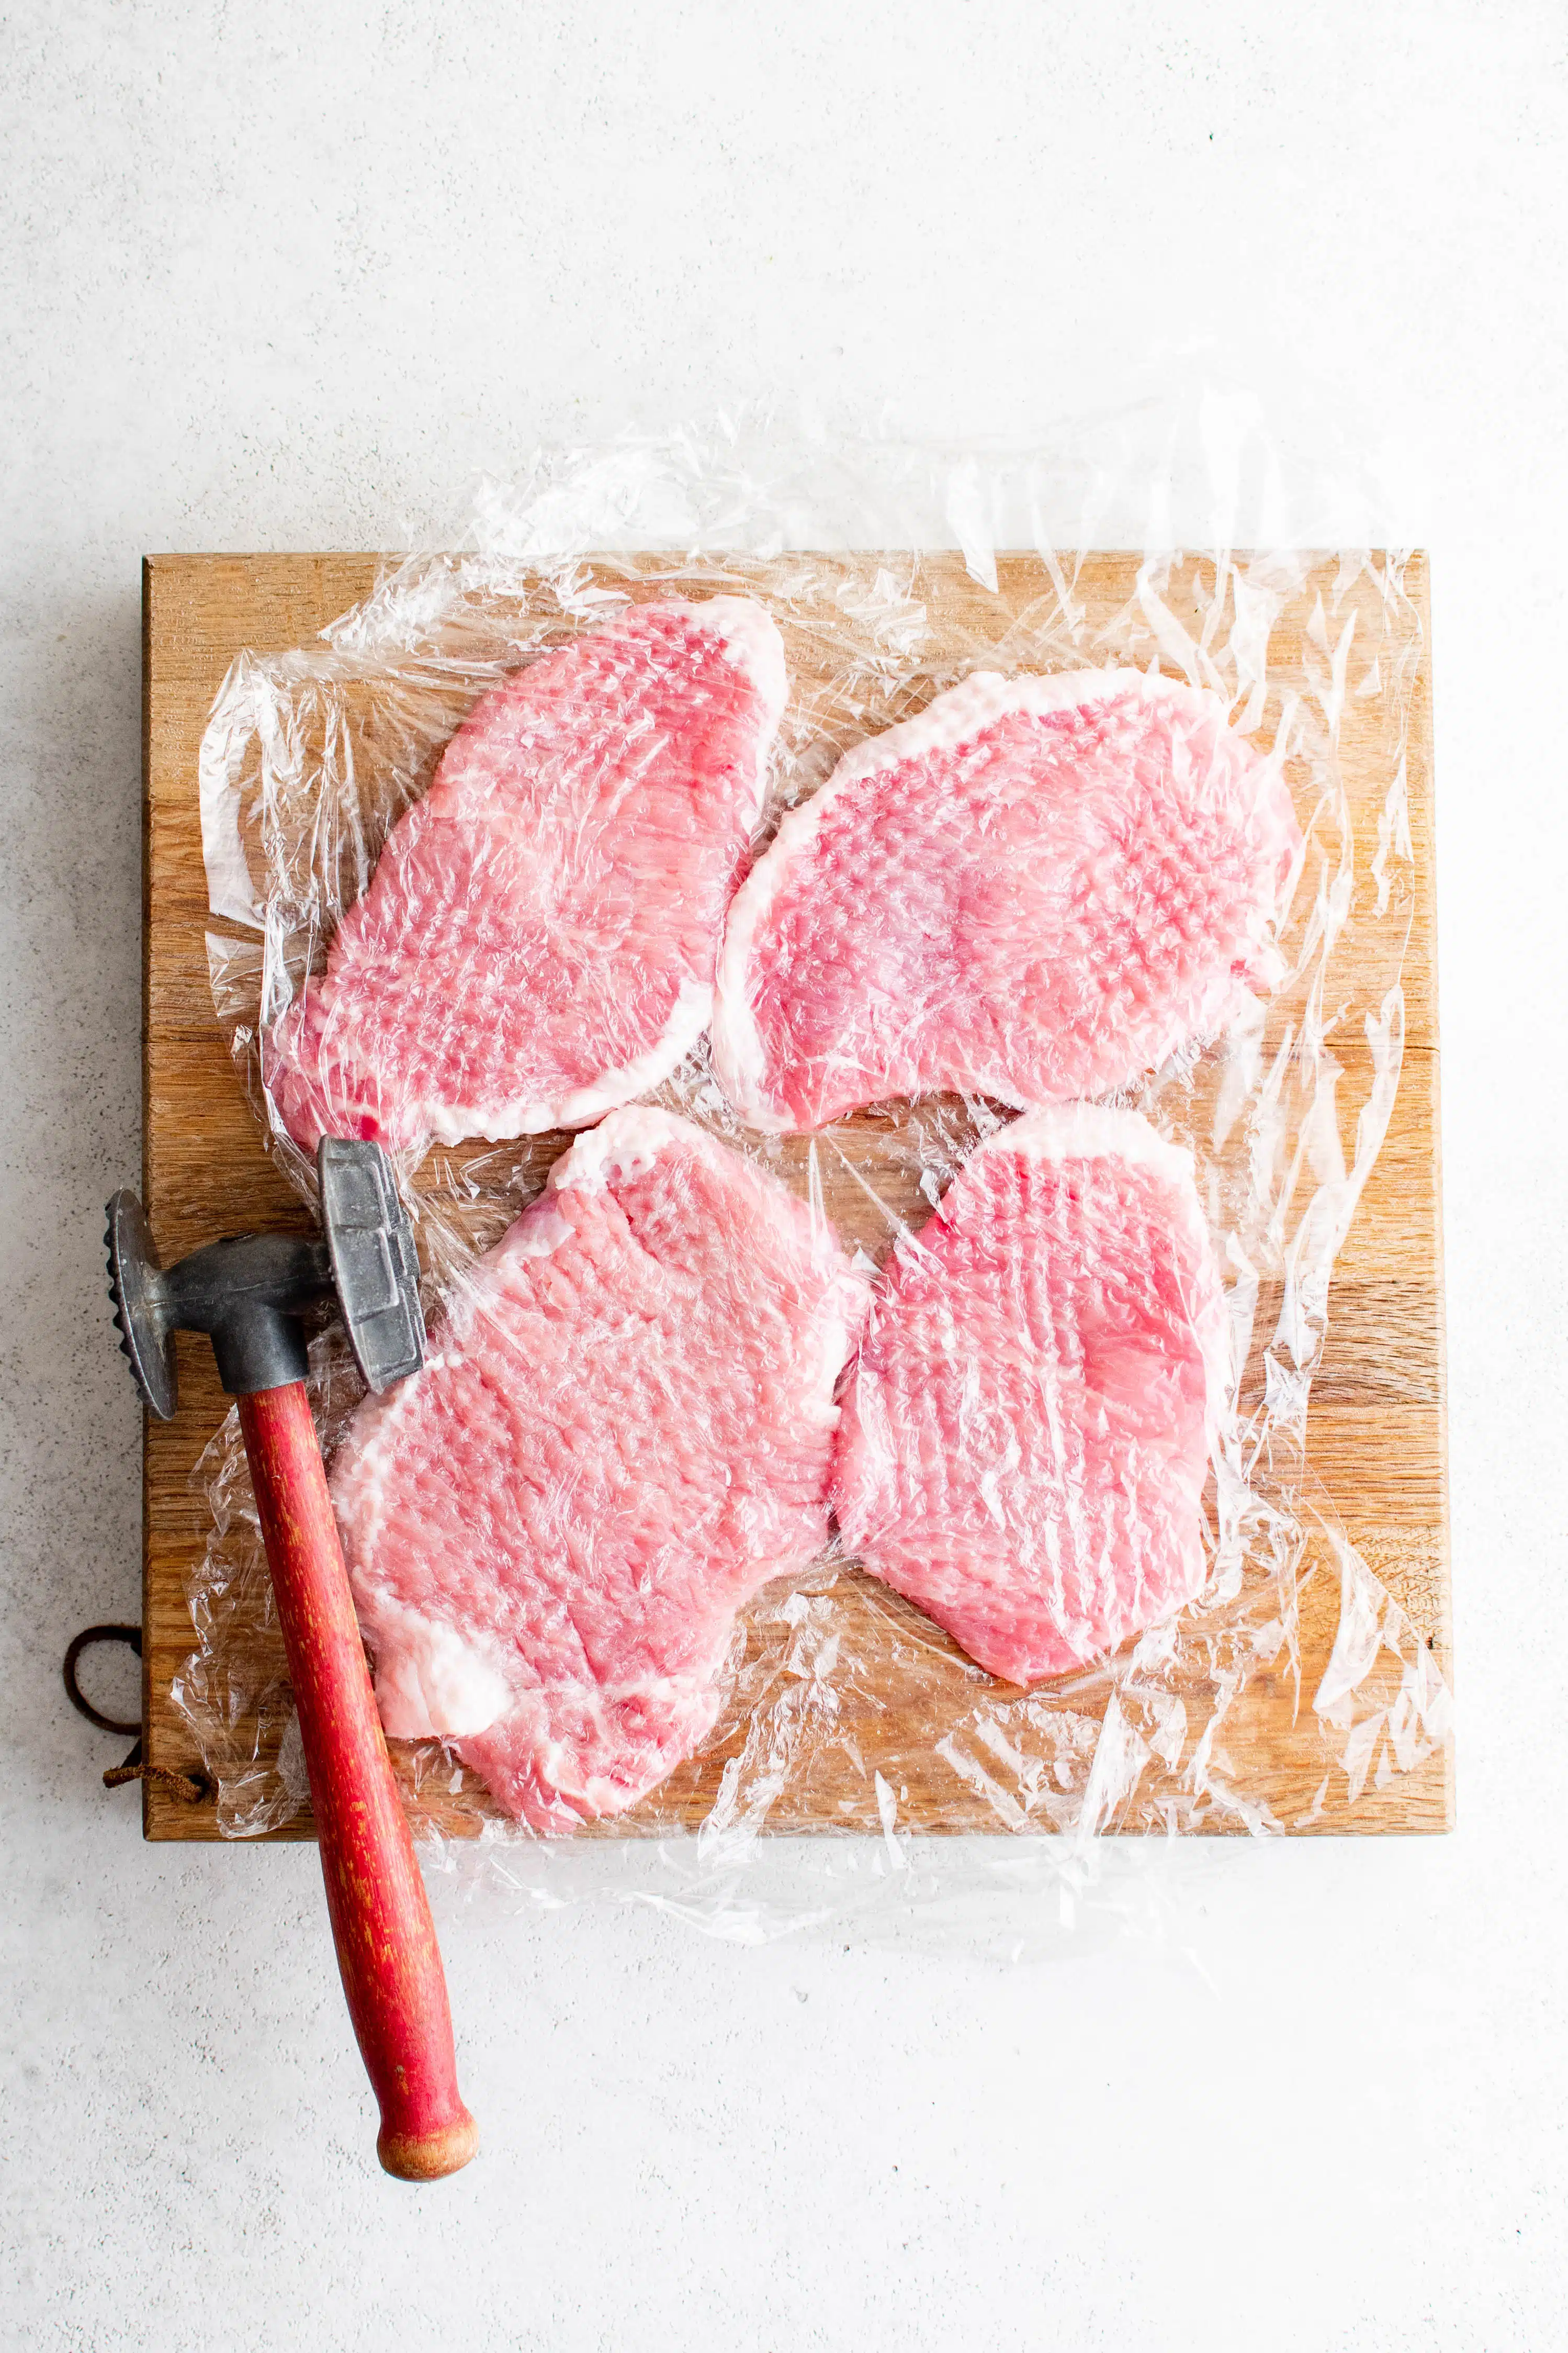 Four boneless pork chops on a wooden cutting board covered with plastic wrap with a meat tenderizer.